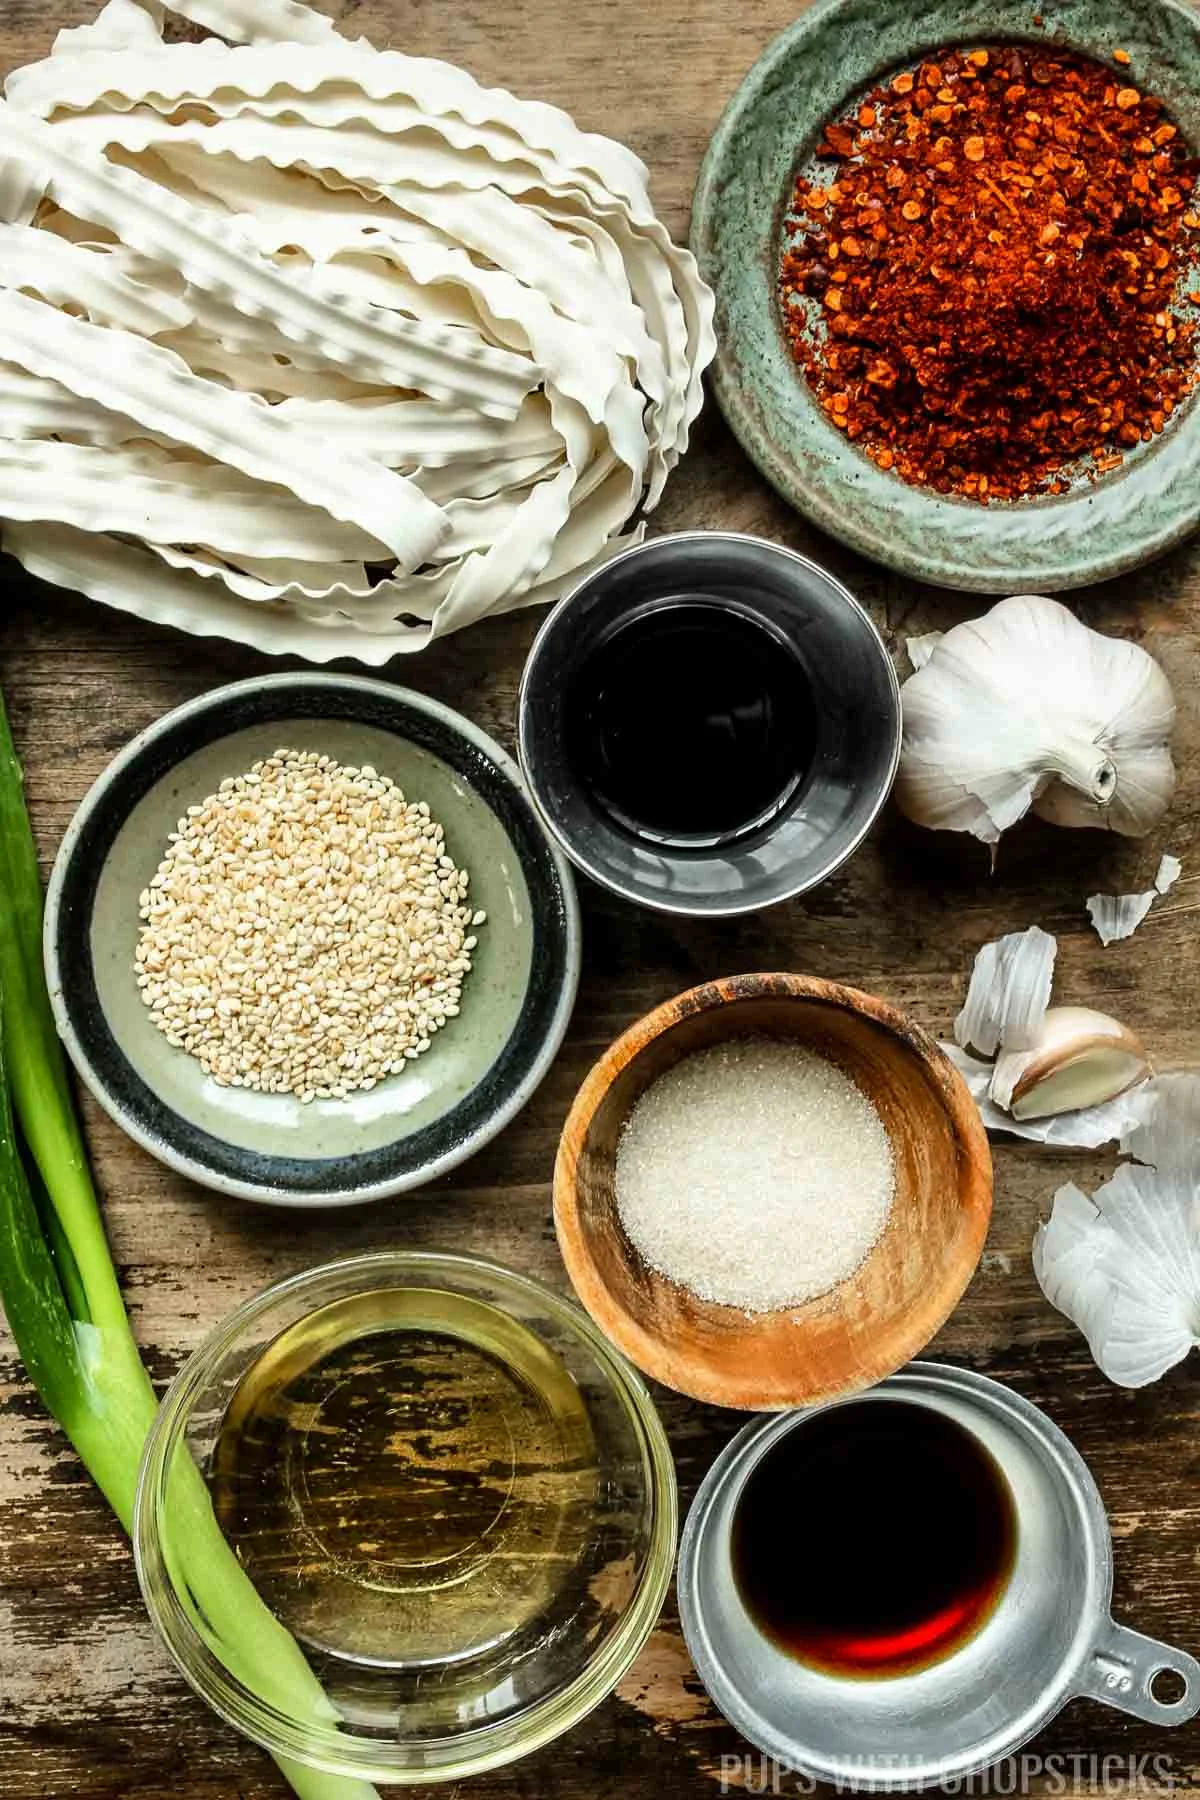 Ingredients for chili oil noodles (knife cut noodles, sichuan pepper flakes, soy sauce, vinegar, sugar, sesame oil, oil, garlic, green onions)